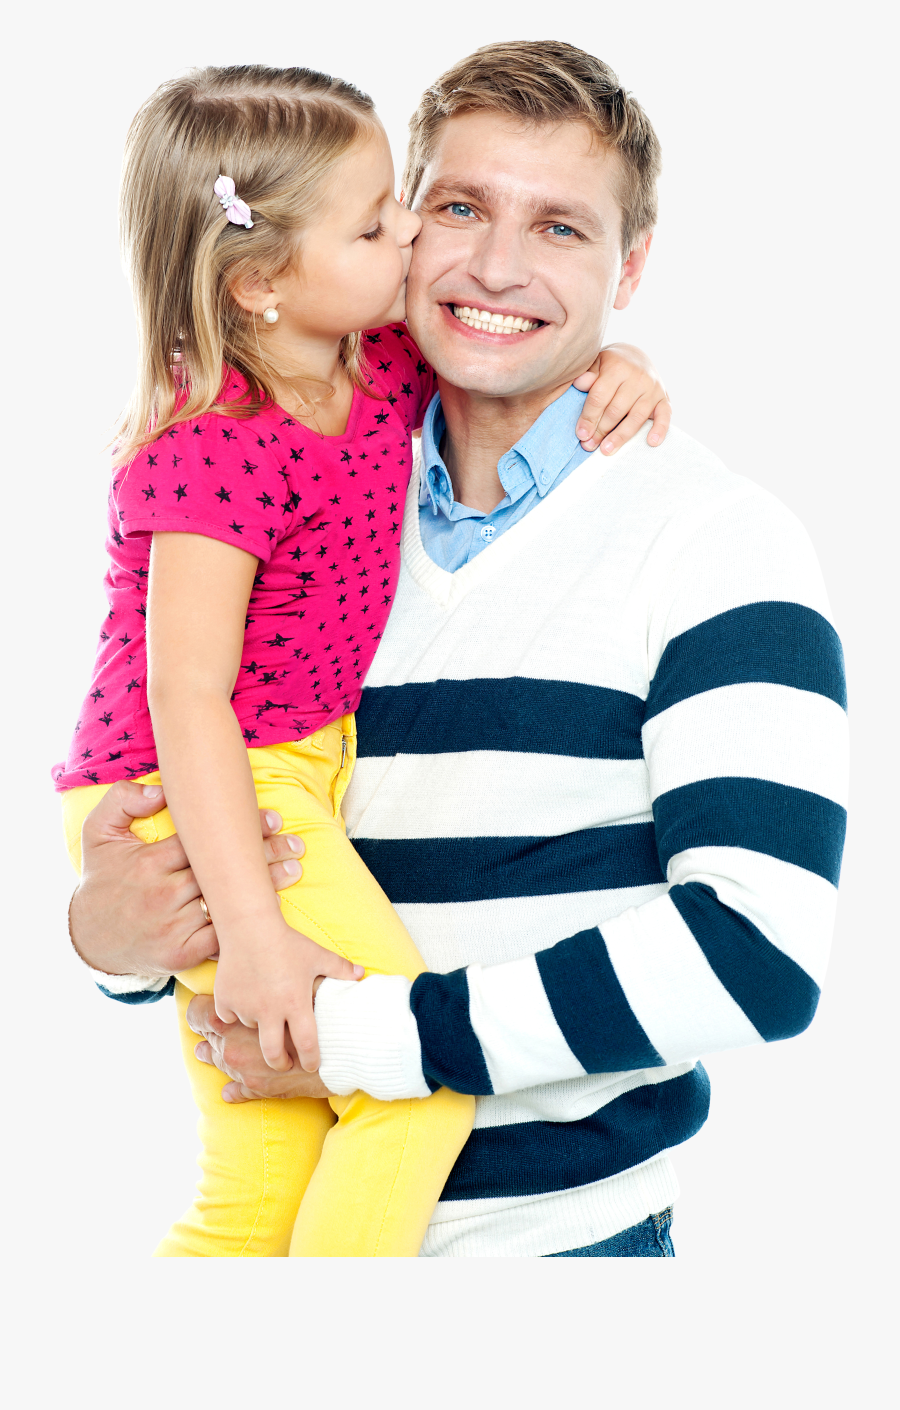 Father And Daughter Png Image, Transparent Clipart